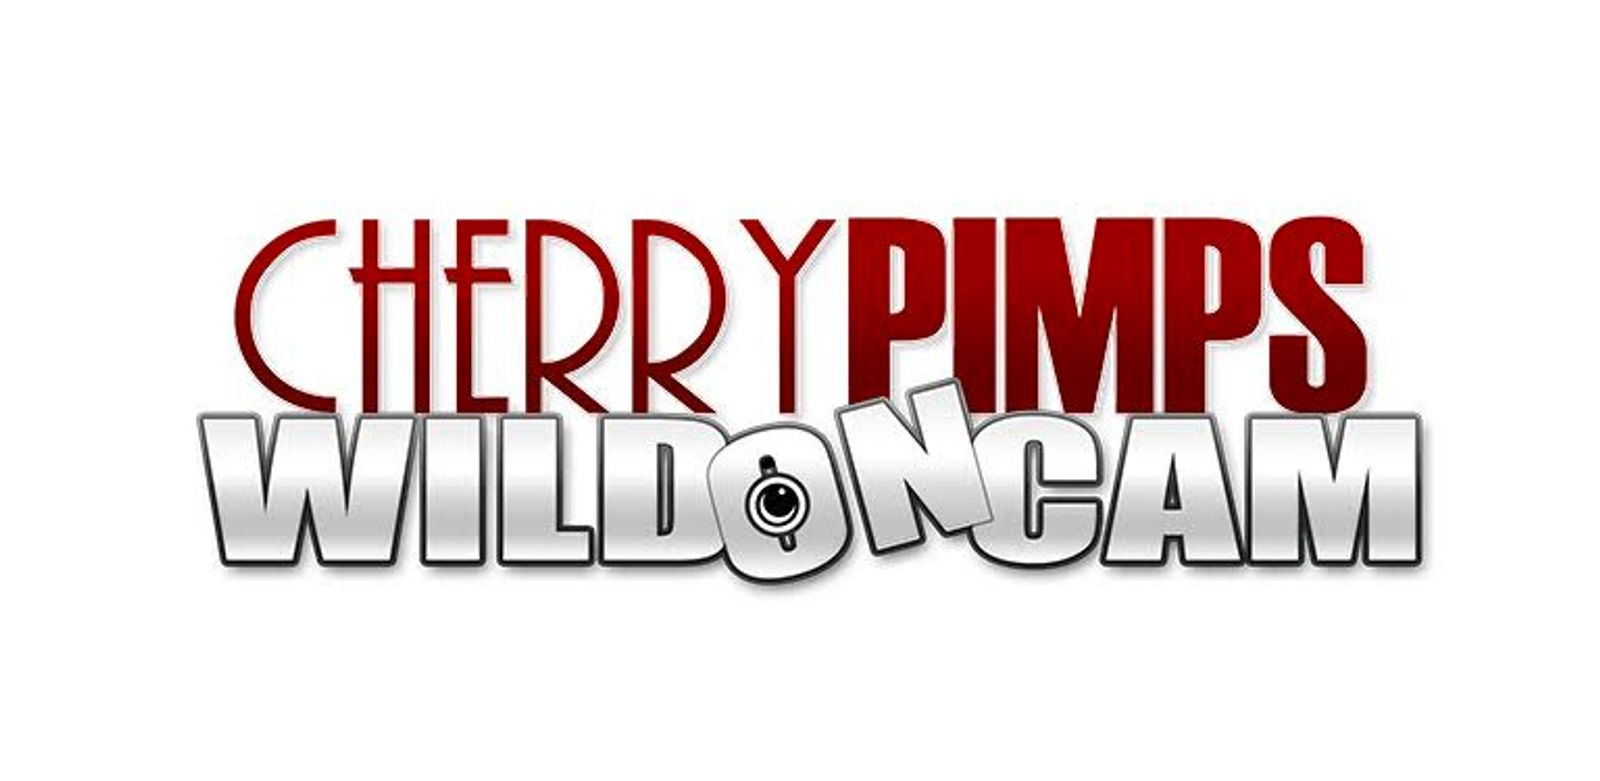 Cherry Pimps’ WildOnCam Has Five Scorching Hot Shows This Week